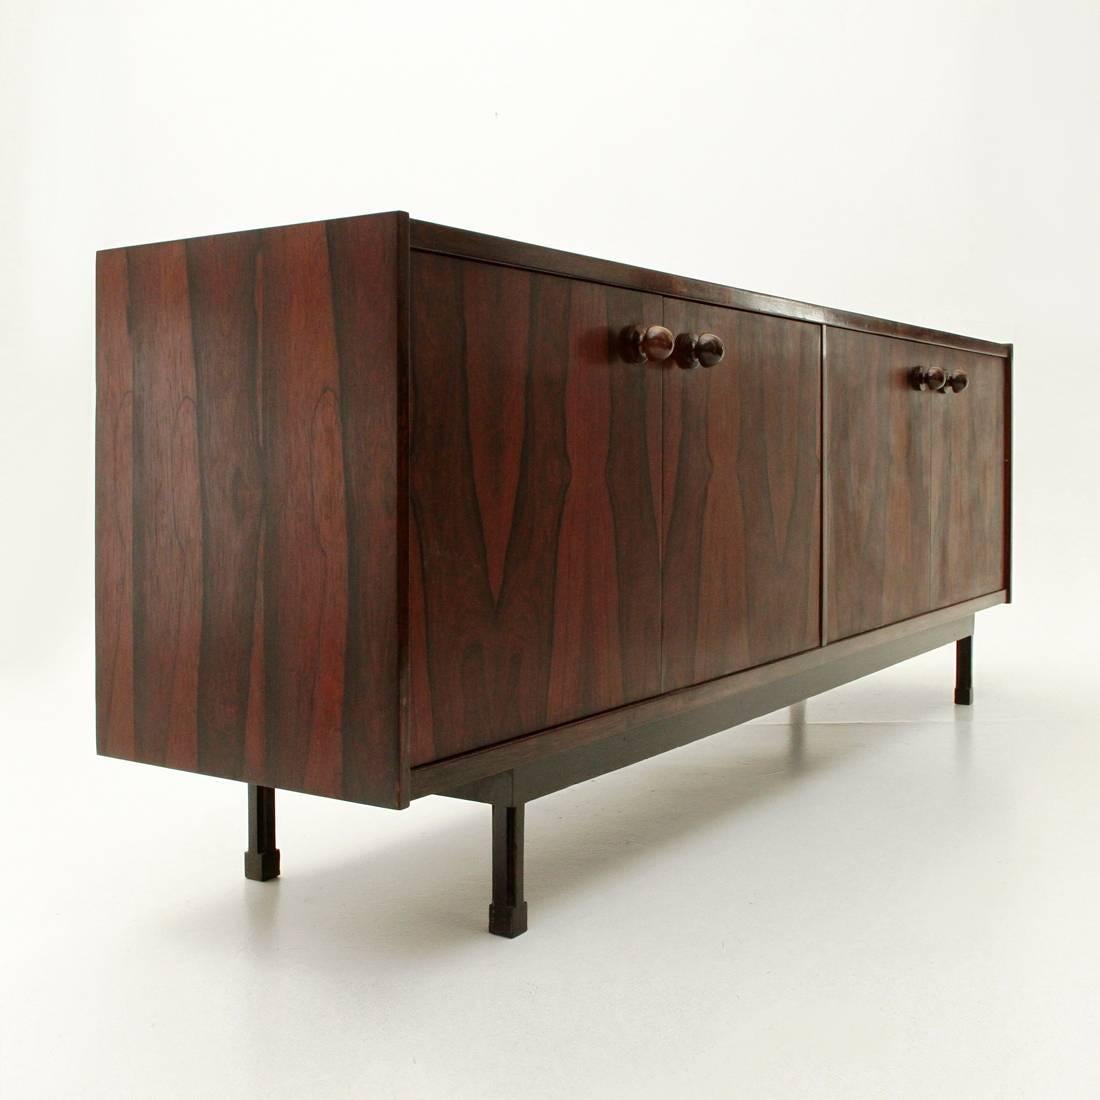 Italian production sideboard, 1960s.
rosewood veneer structure.
Double compartment with doors.
internal chest of drawers with five drawers.
Wooden handles and legs.
Good conditions.

Dimensions: Width 214 cm height 79 cm depth 45 cm.
 